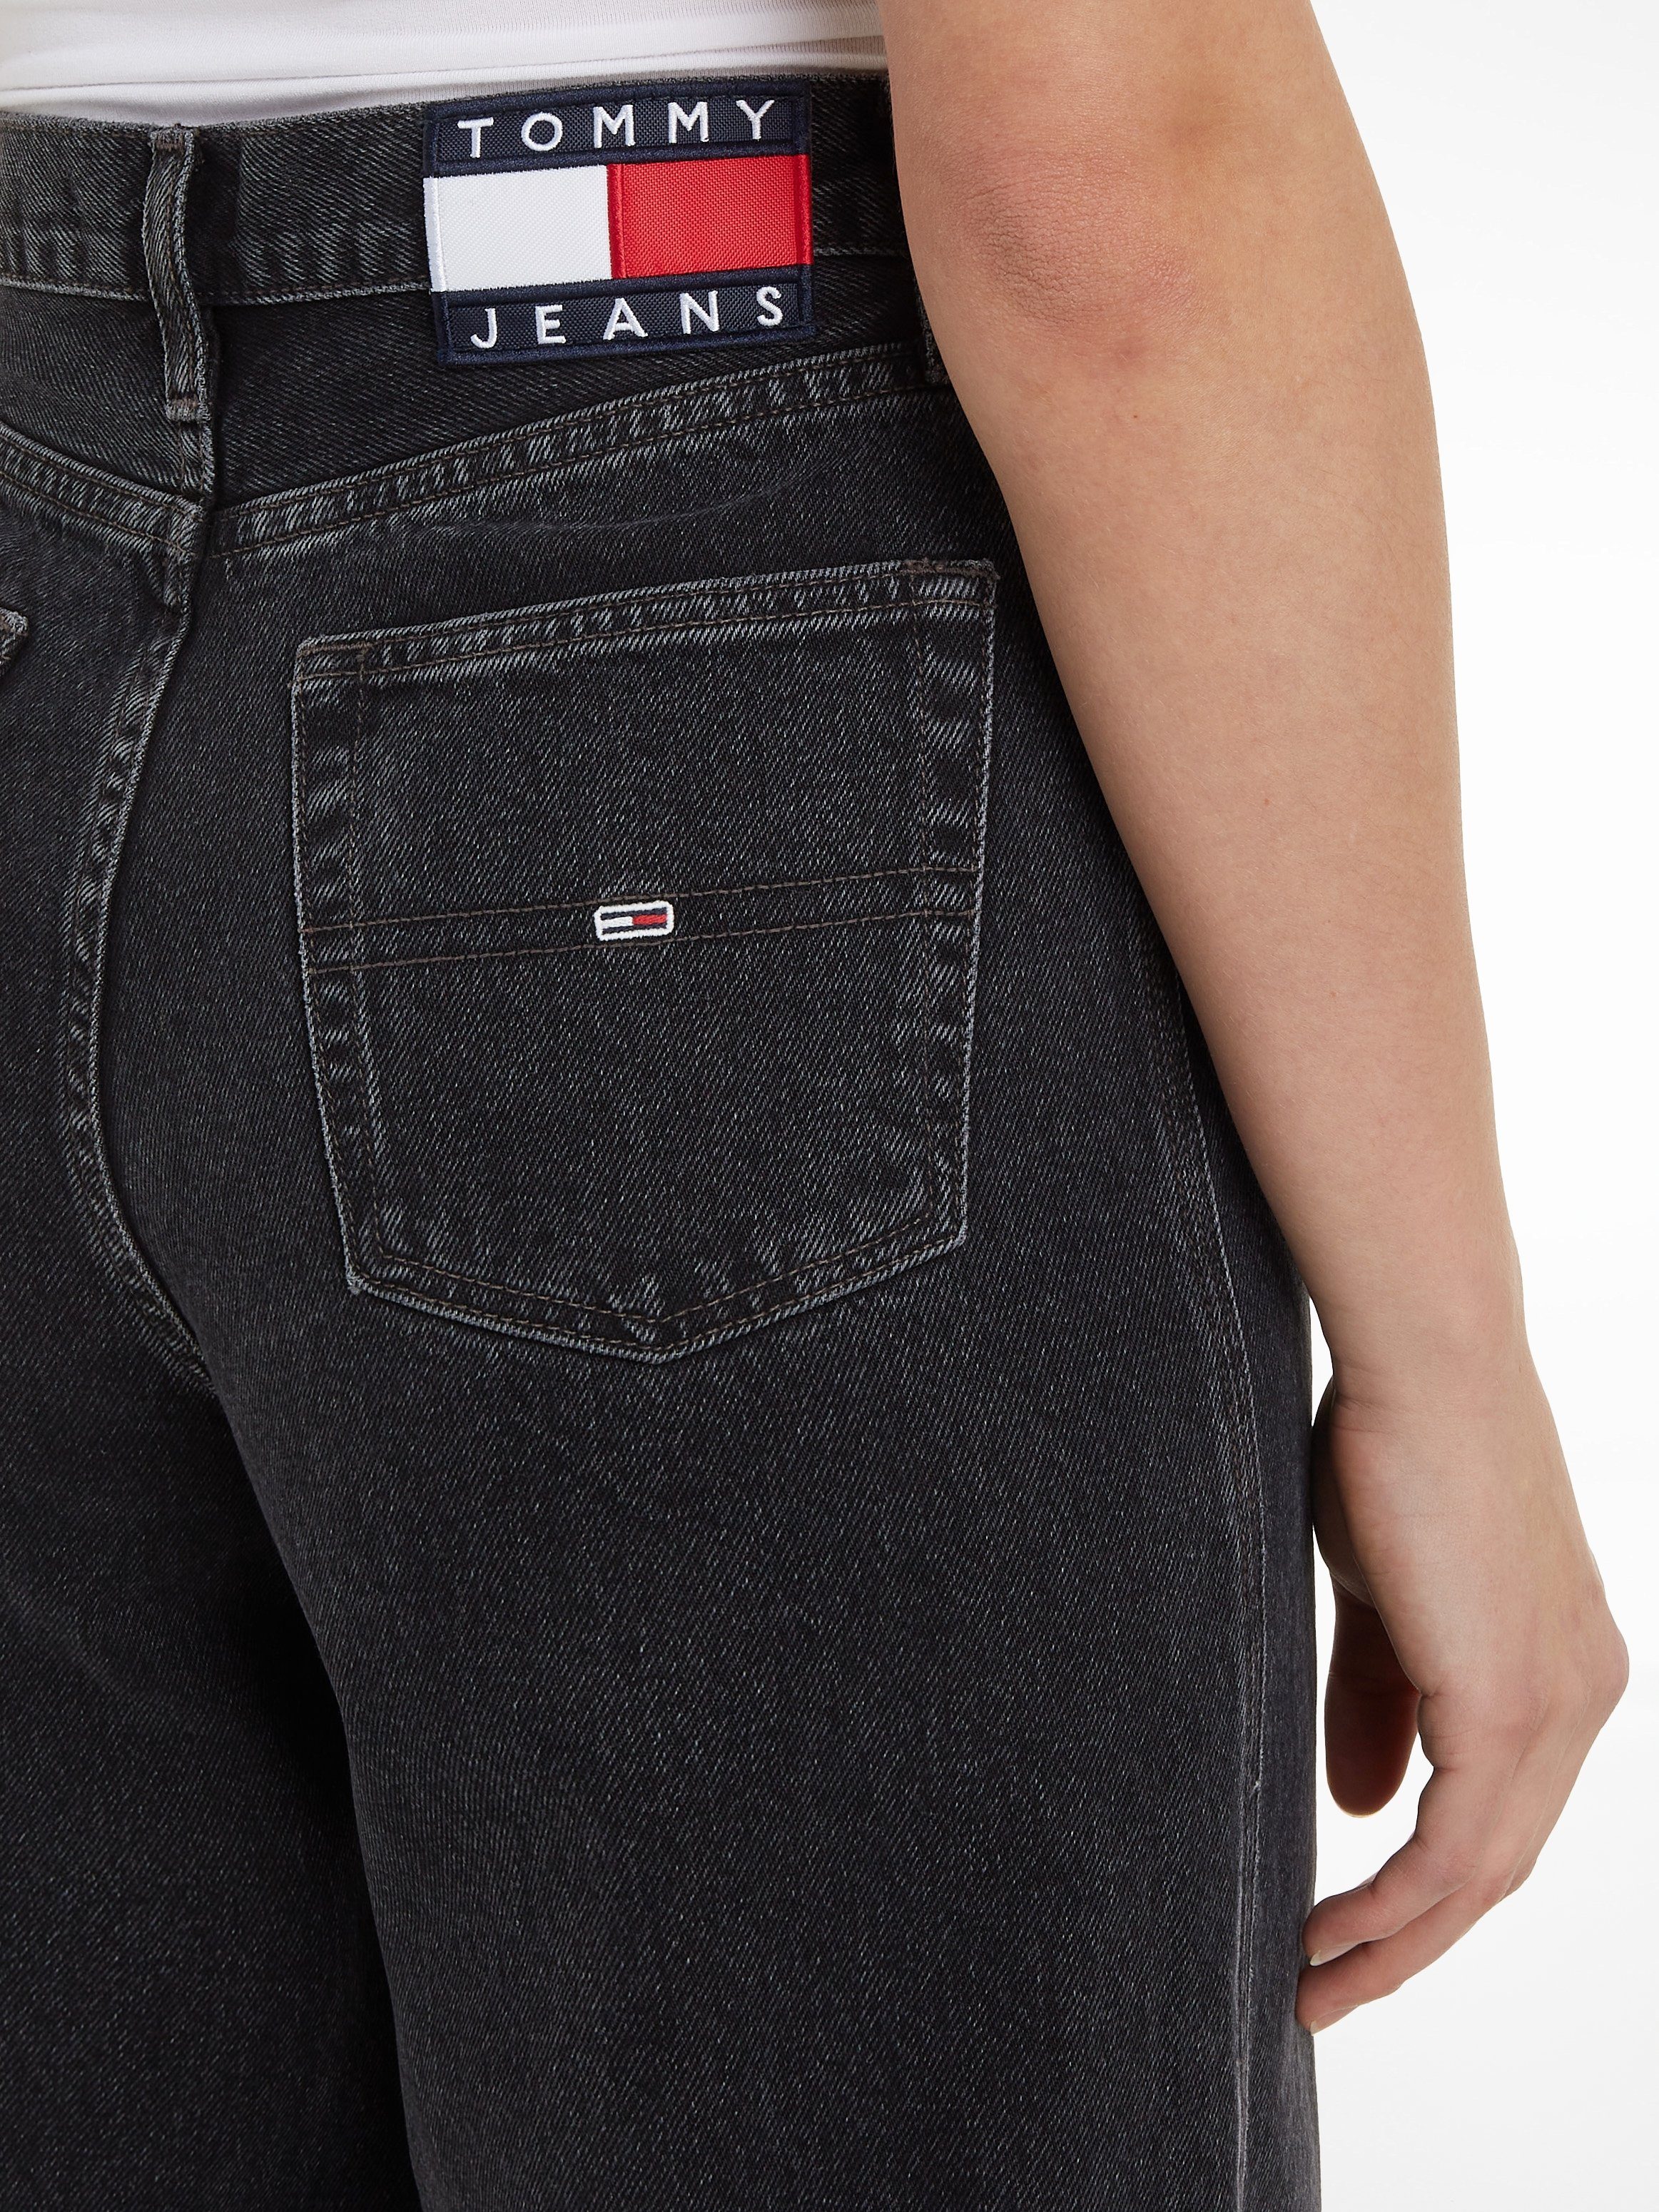 Tommy Jeans mit Weite Jeans Tommy black Jeans Logobadges